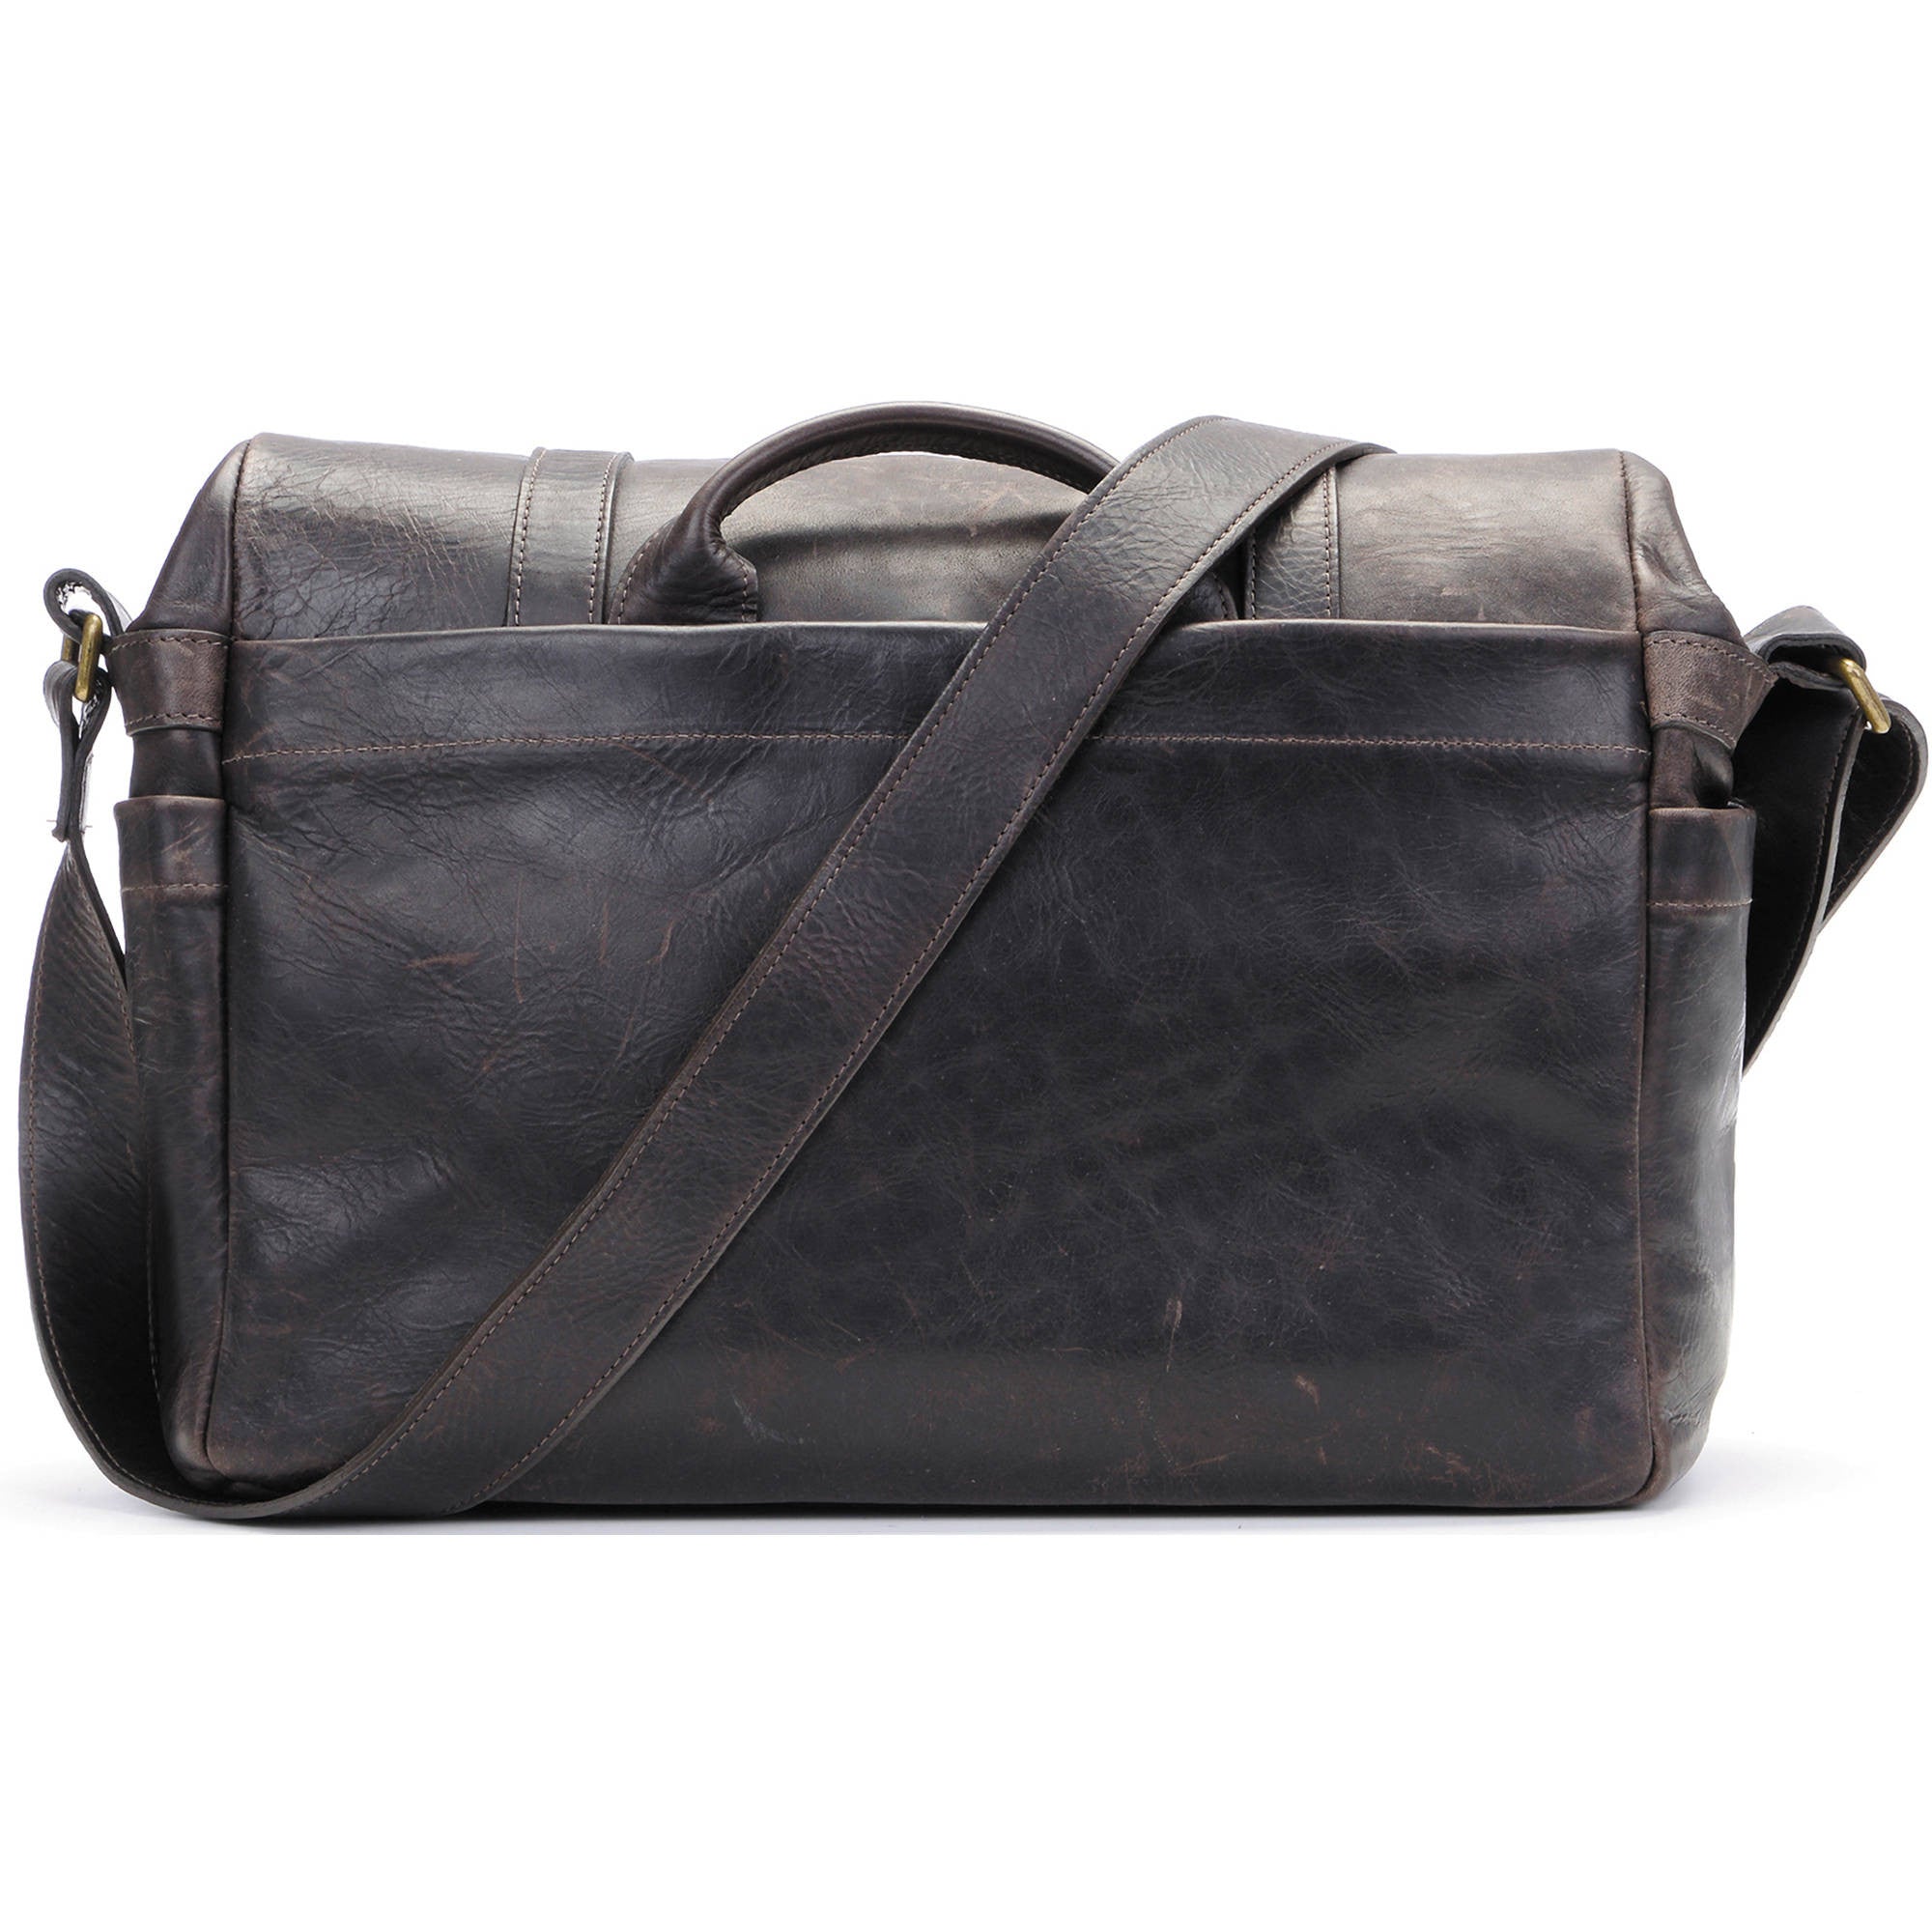 ONA The Brixton Camera and Laptop Messenger Bag Dark Truffle Leather, bags shoulder bags, ONA - Pictureline  - 2